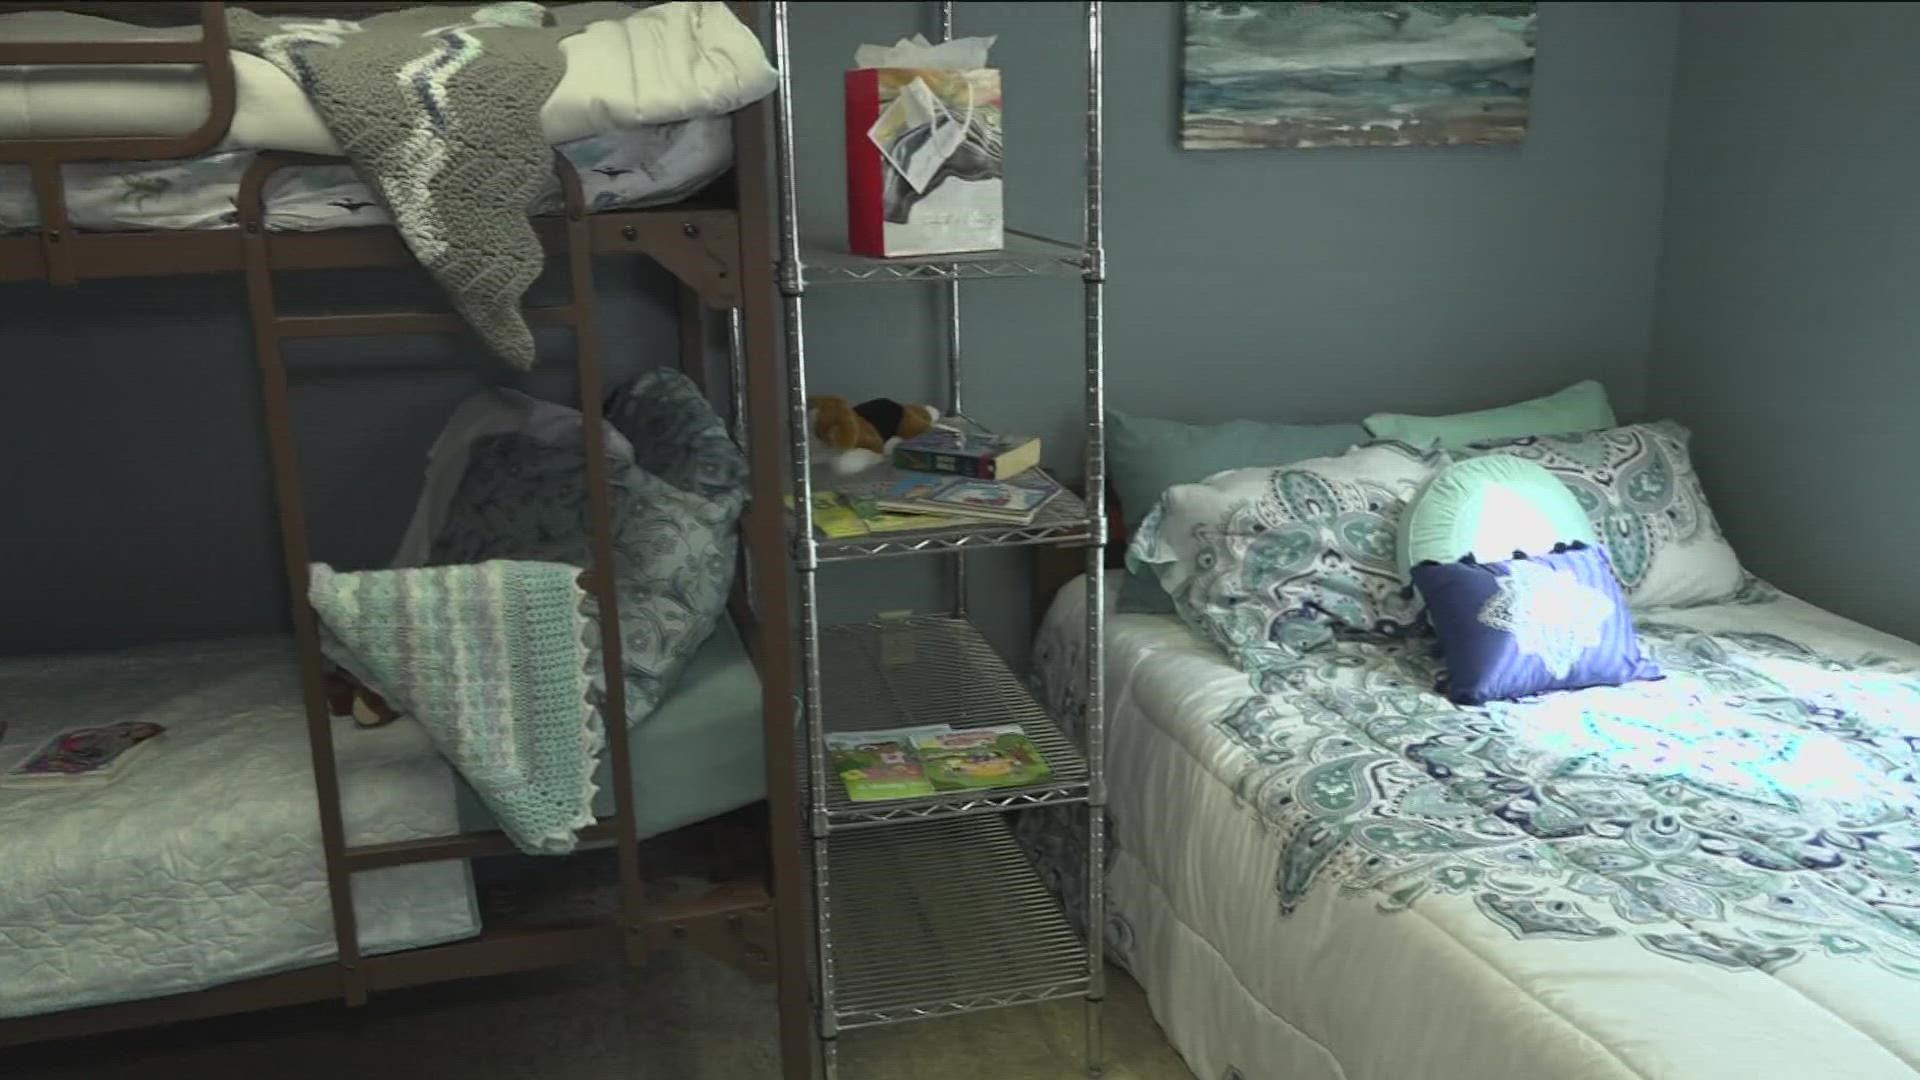 The goal is to make these rooms more inviting and relaxing for the parents and children needing to stay at Hancock County's only homeless shelter.